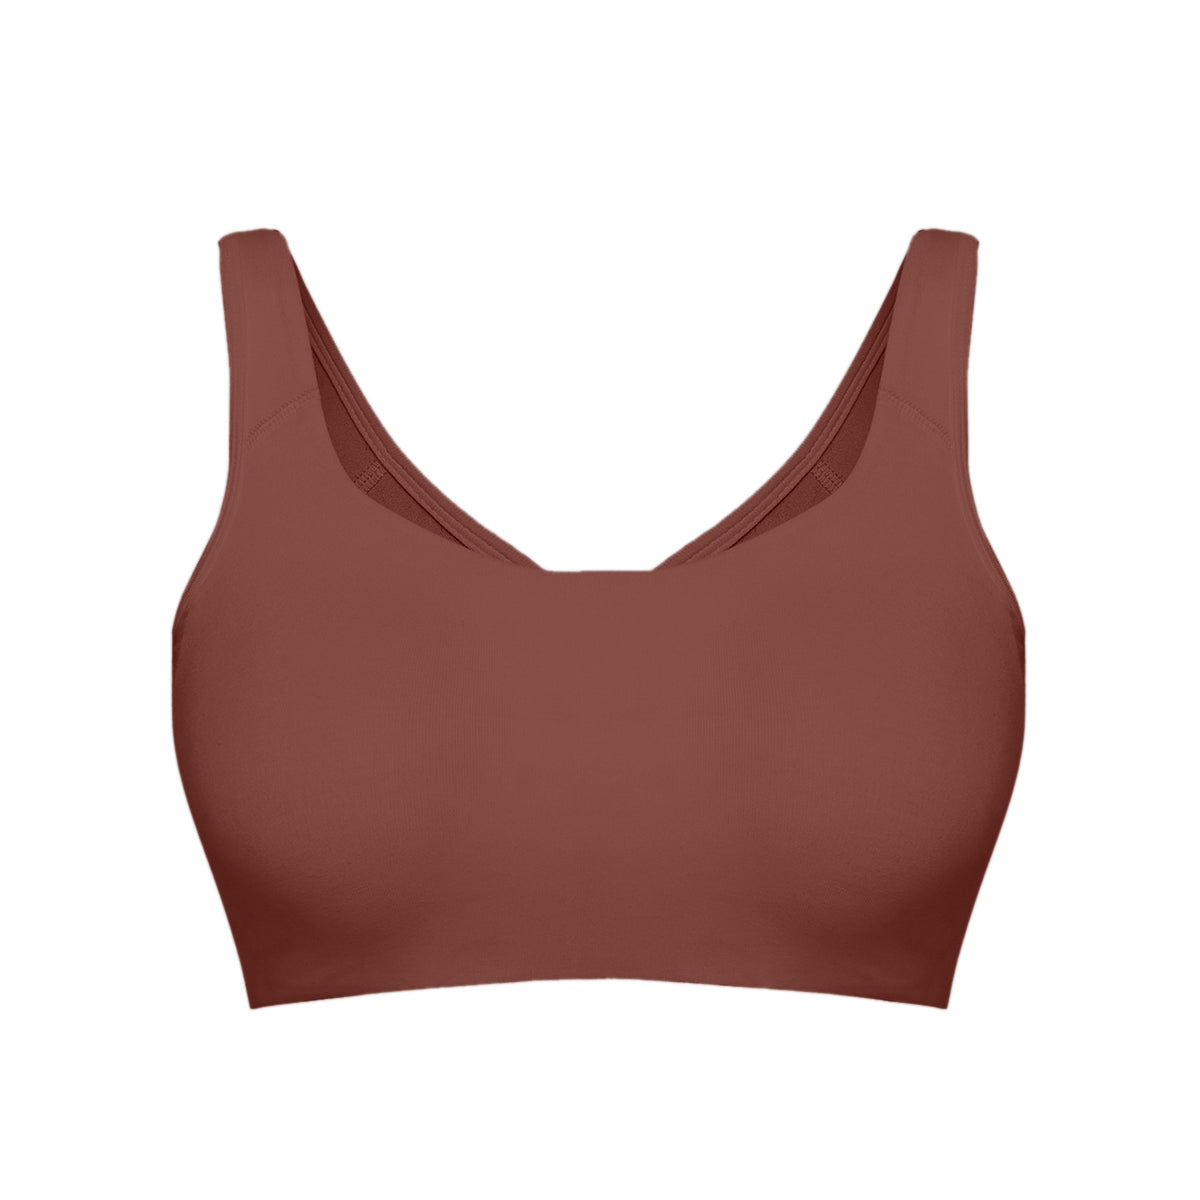 Soft cup easy-peasy slip-on bra with Full coverage - Mahogany NYB113